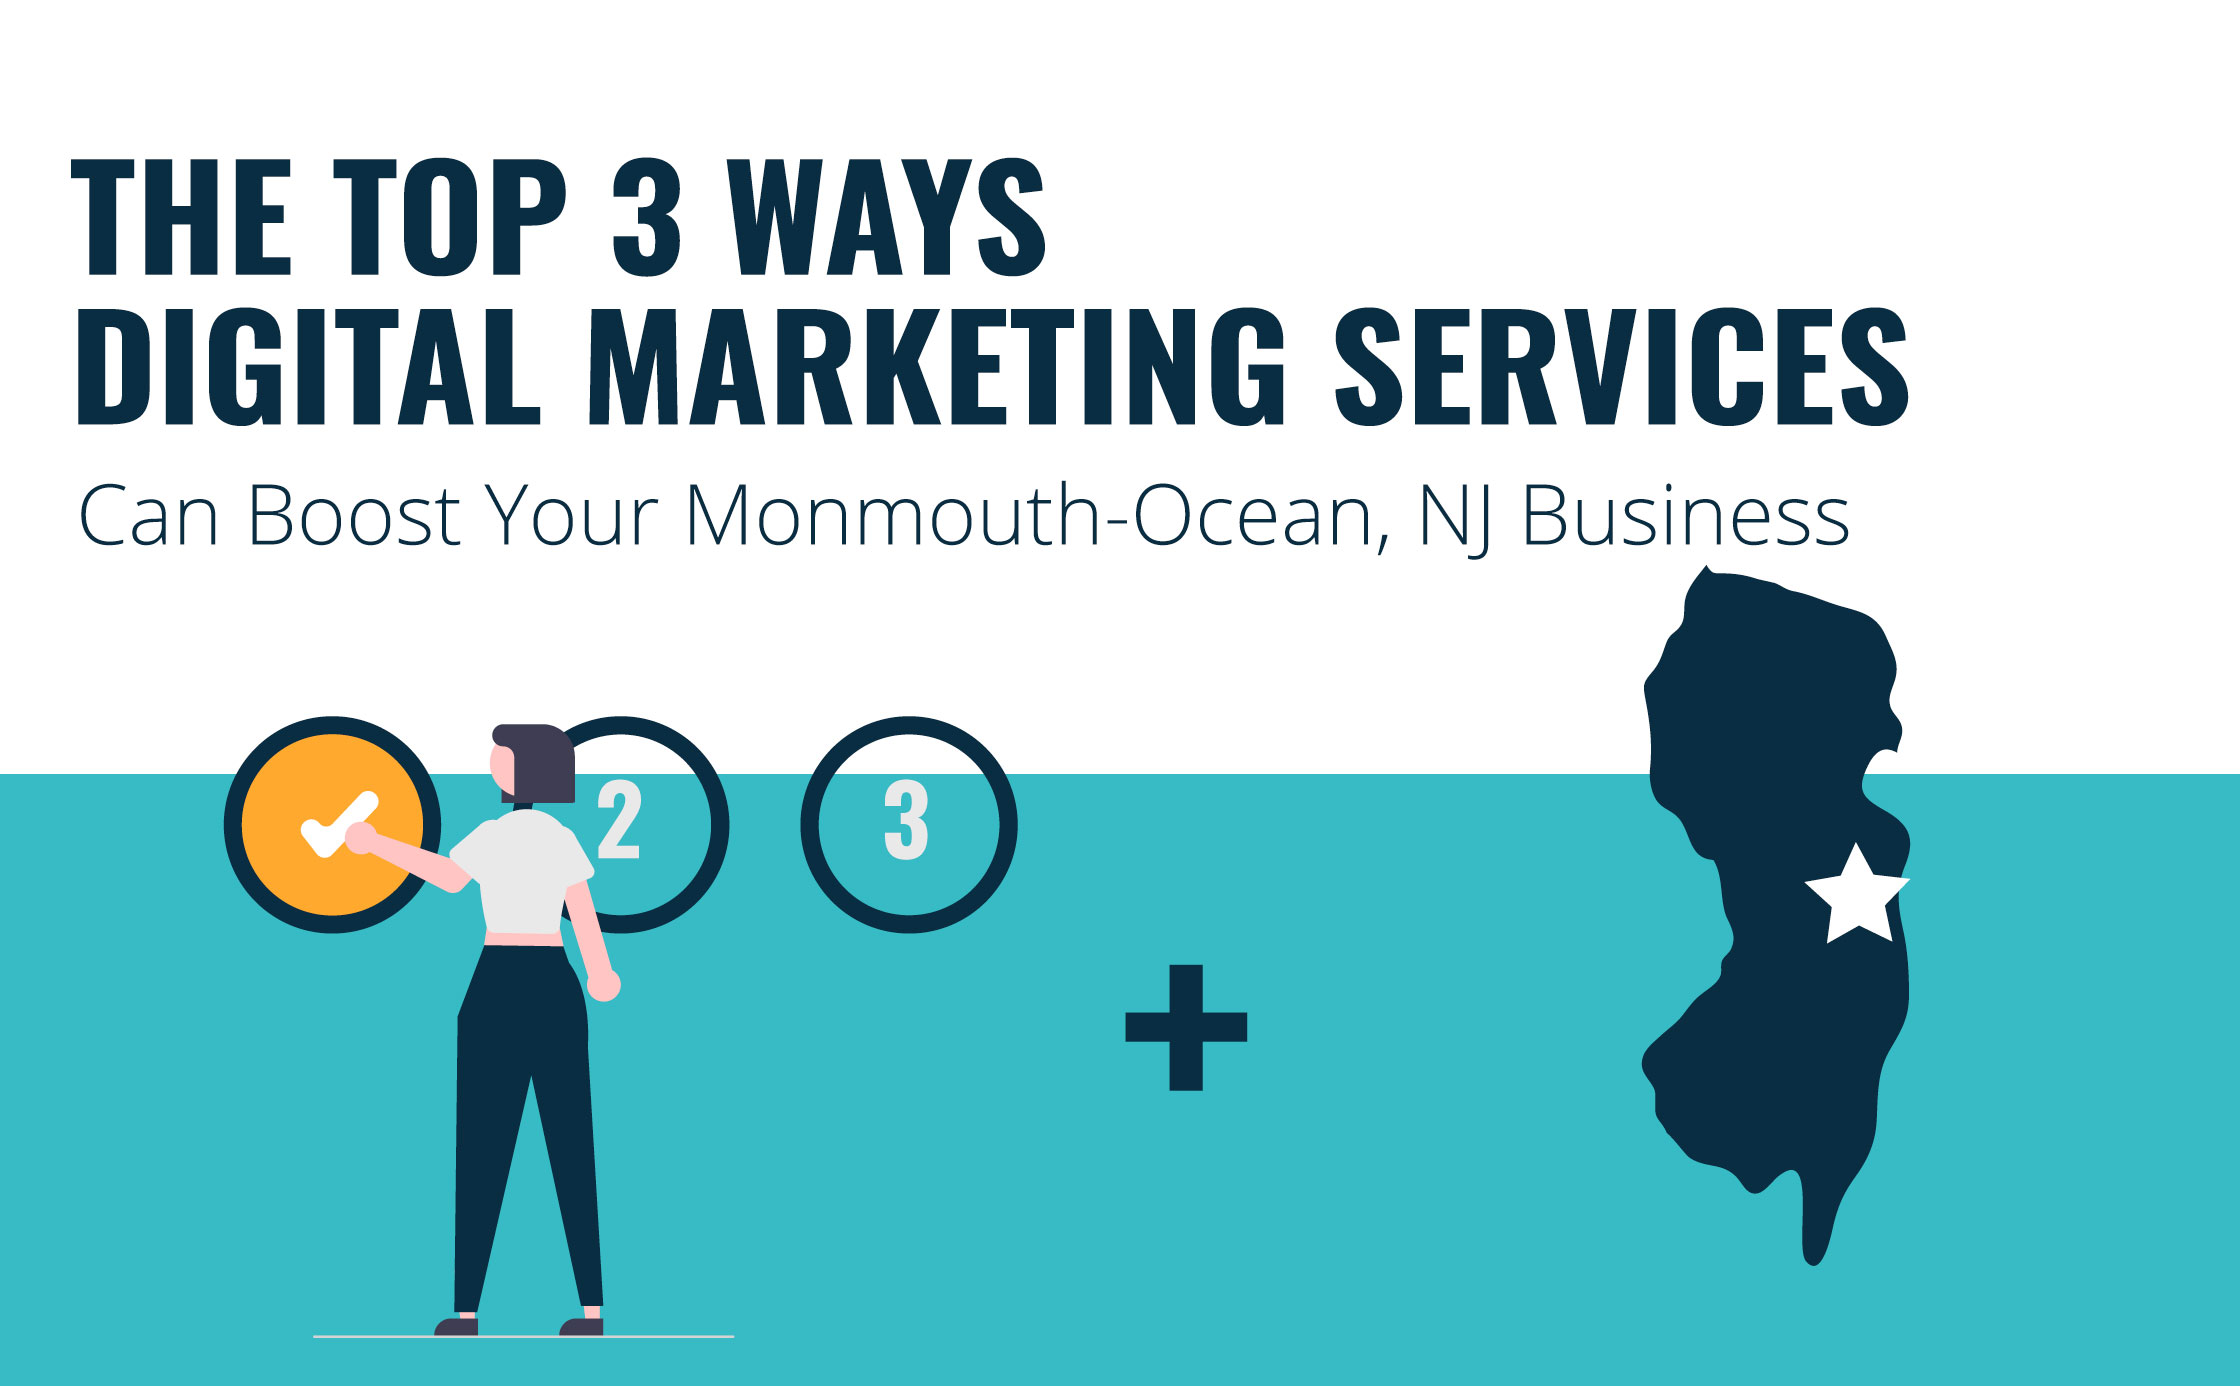 The Top 3 Ways Digital Marketing Services Can Boost Your Monmouth-Ocean, NJ Business